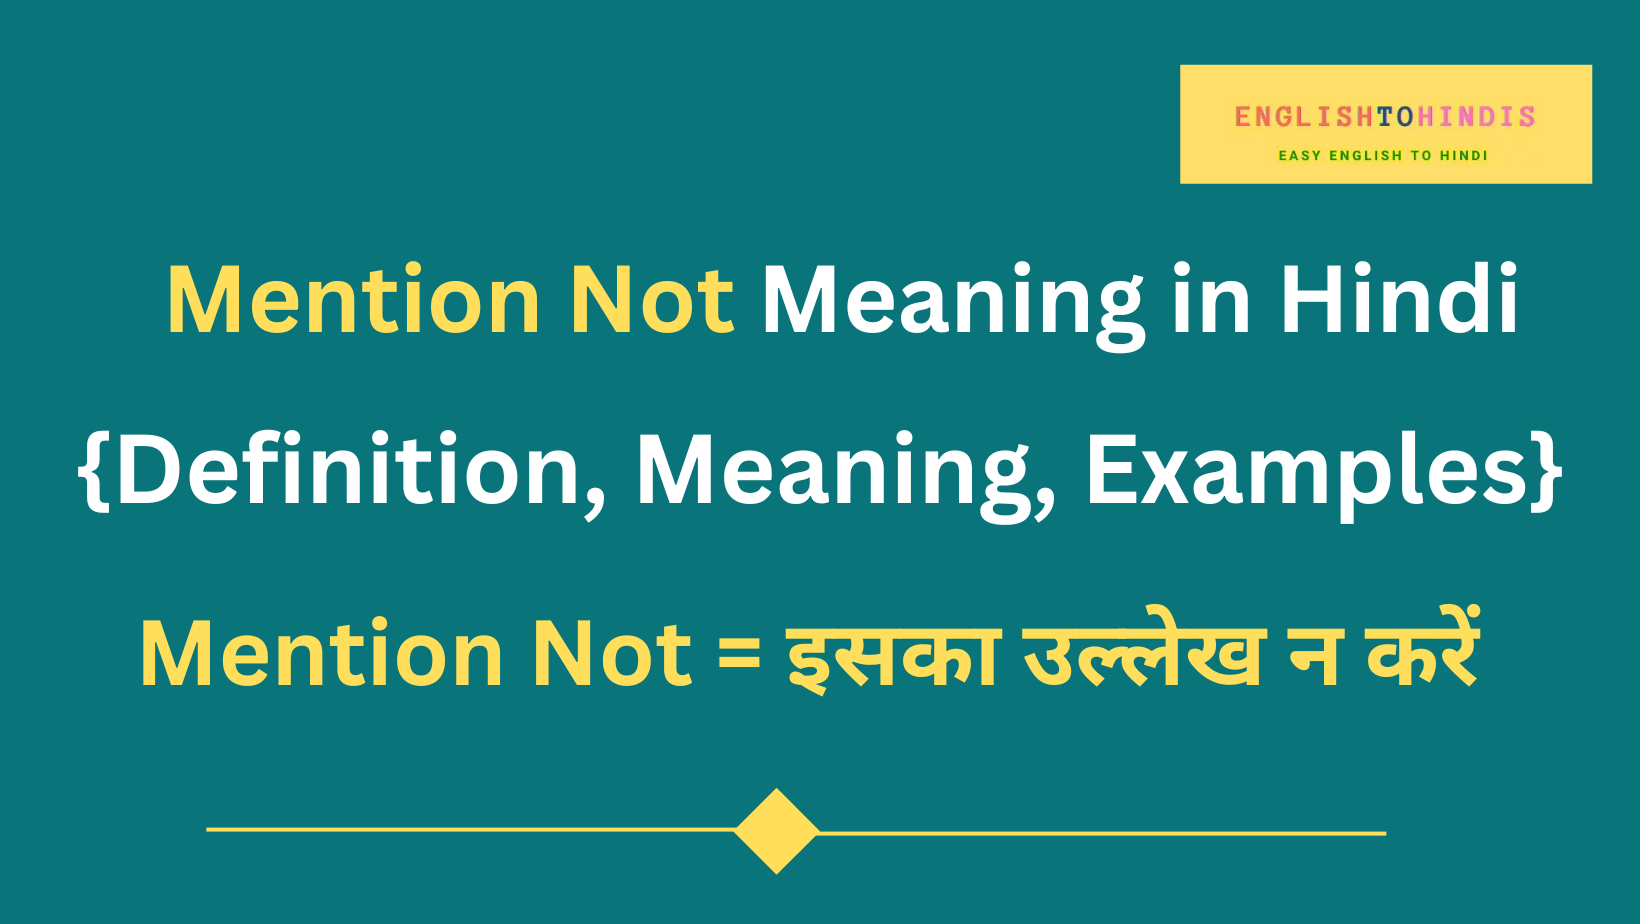 Mention Not Meaning in Hindi